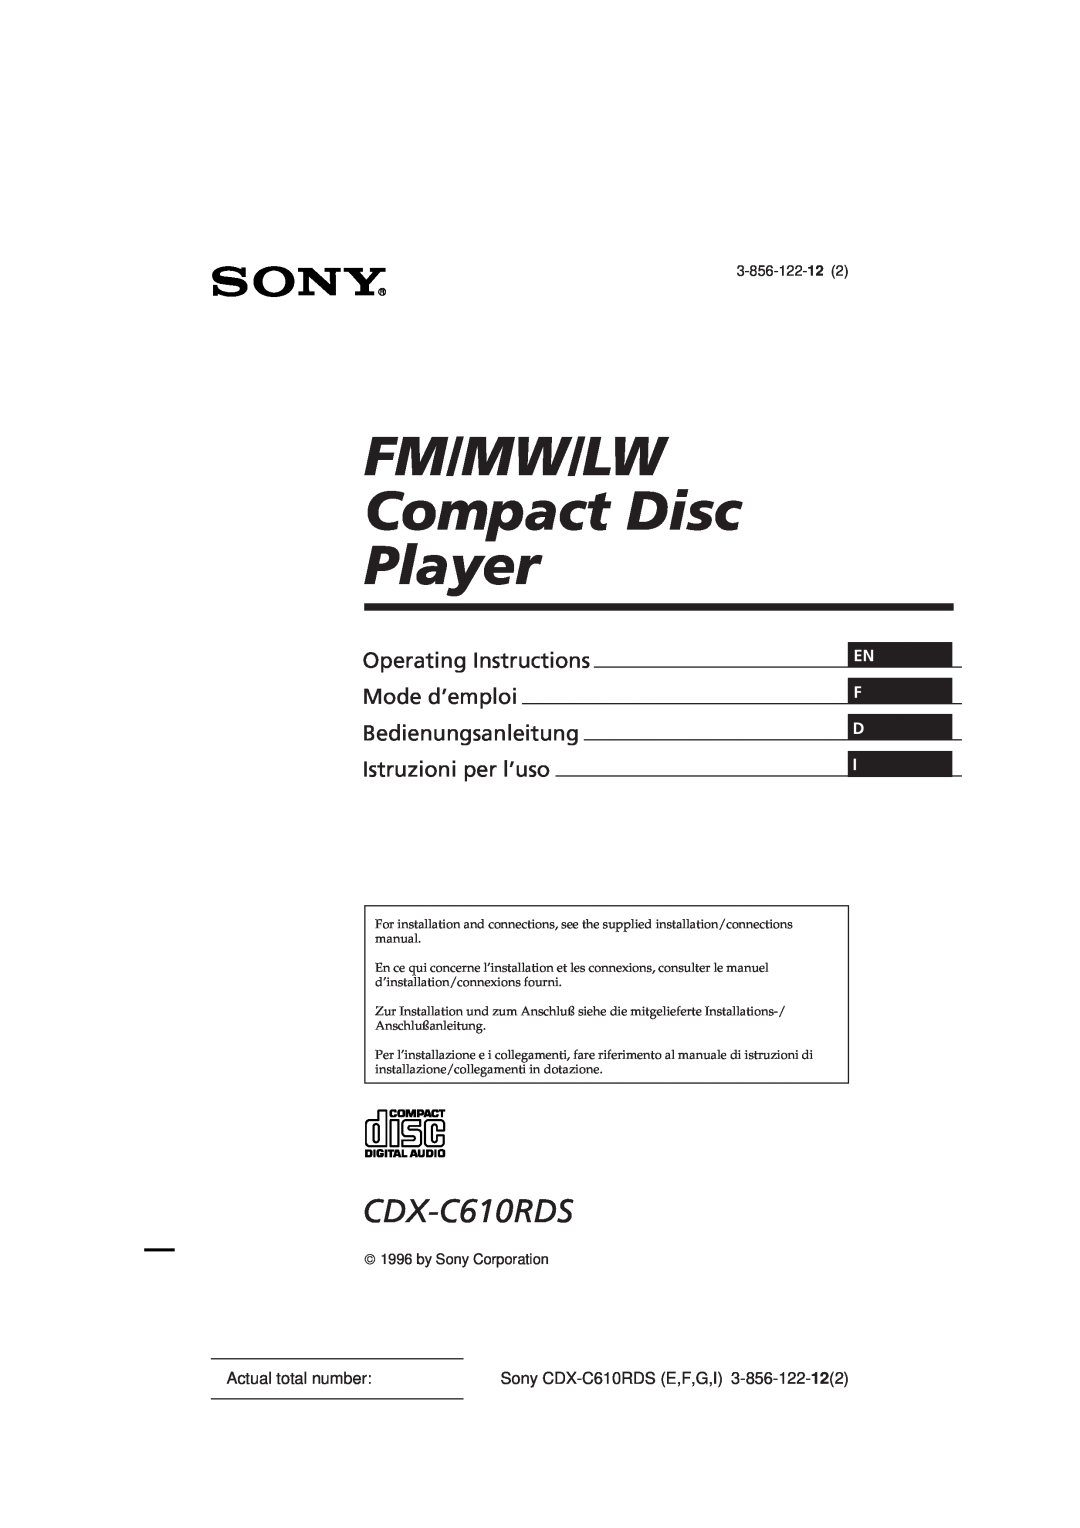 Sony manual En F D I, Actual total number, Sony CDX-C610RDSE,F,G,I, 3-856-122-12, by Sony Corporation 